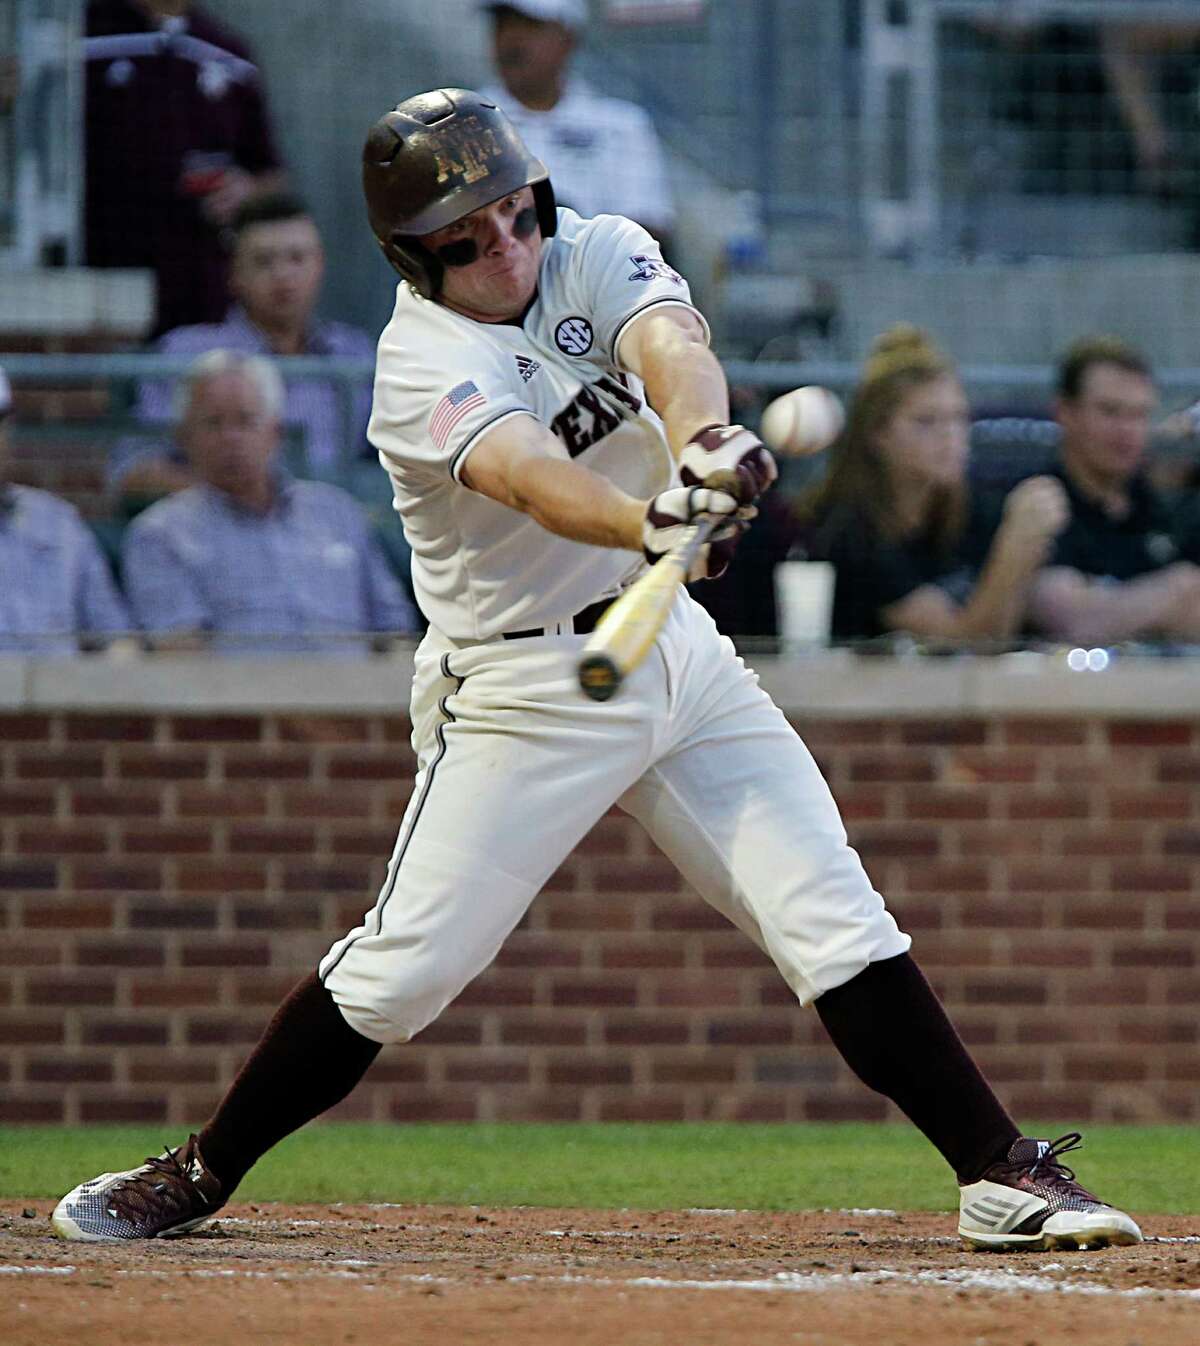 Texas A&M catcher Boomer White hits a double during the sixth inning of college baseball game action against Vanderbilt at Blue Bell Park Thursday, May 5, 2016, in College Station.